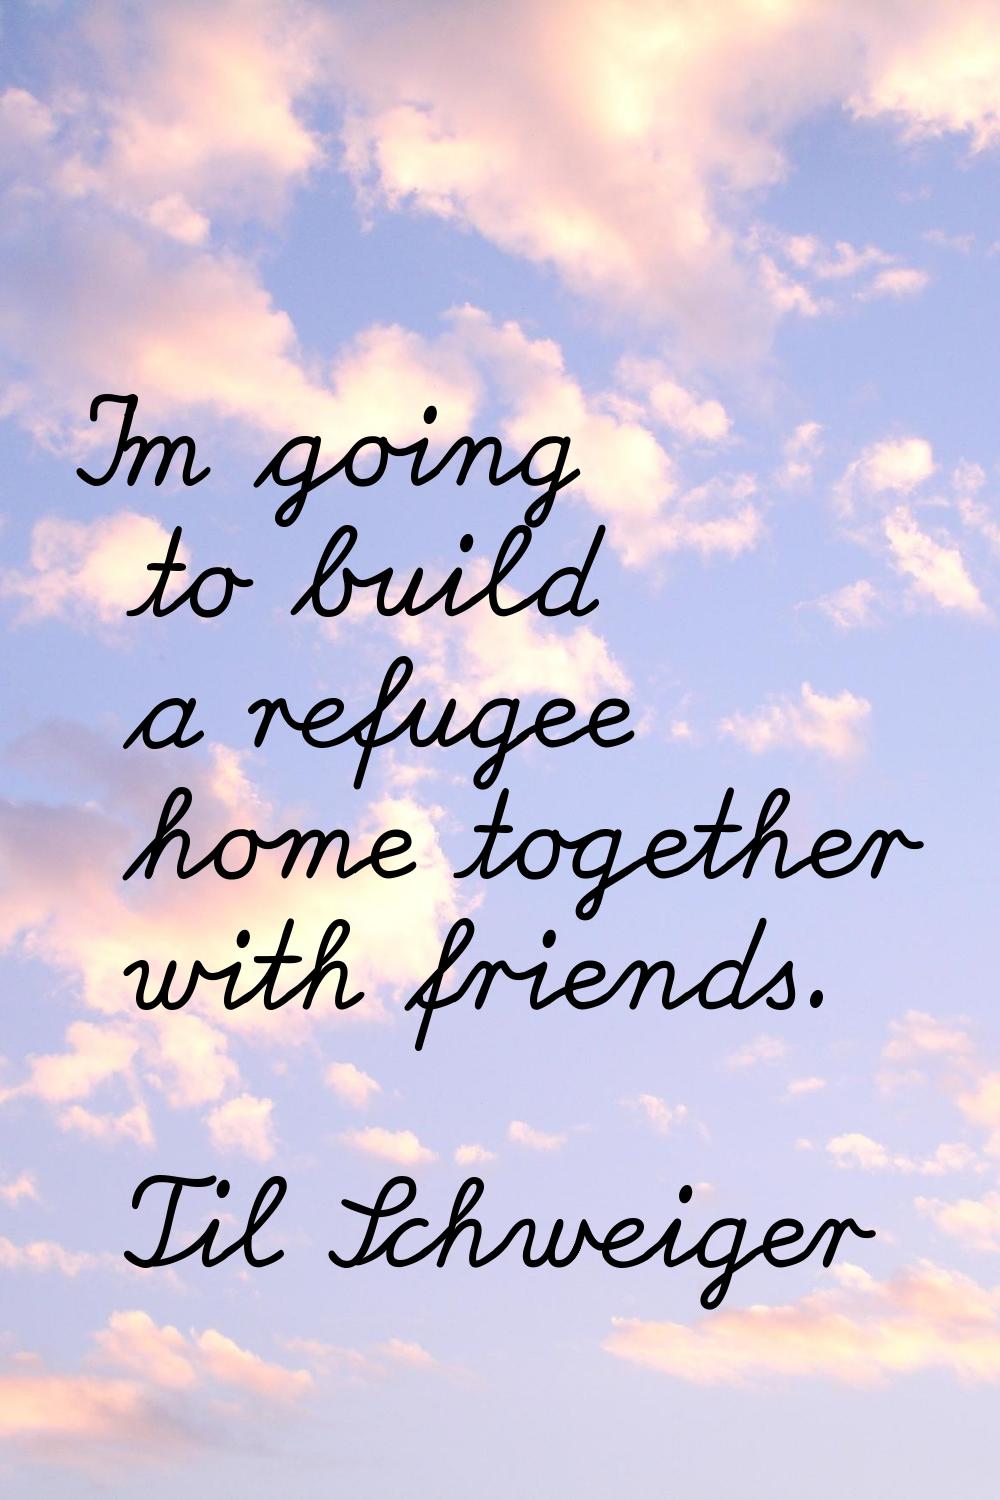 I'm going to build a refugee home together with friends.